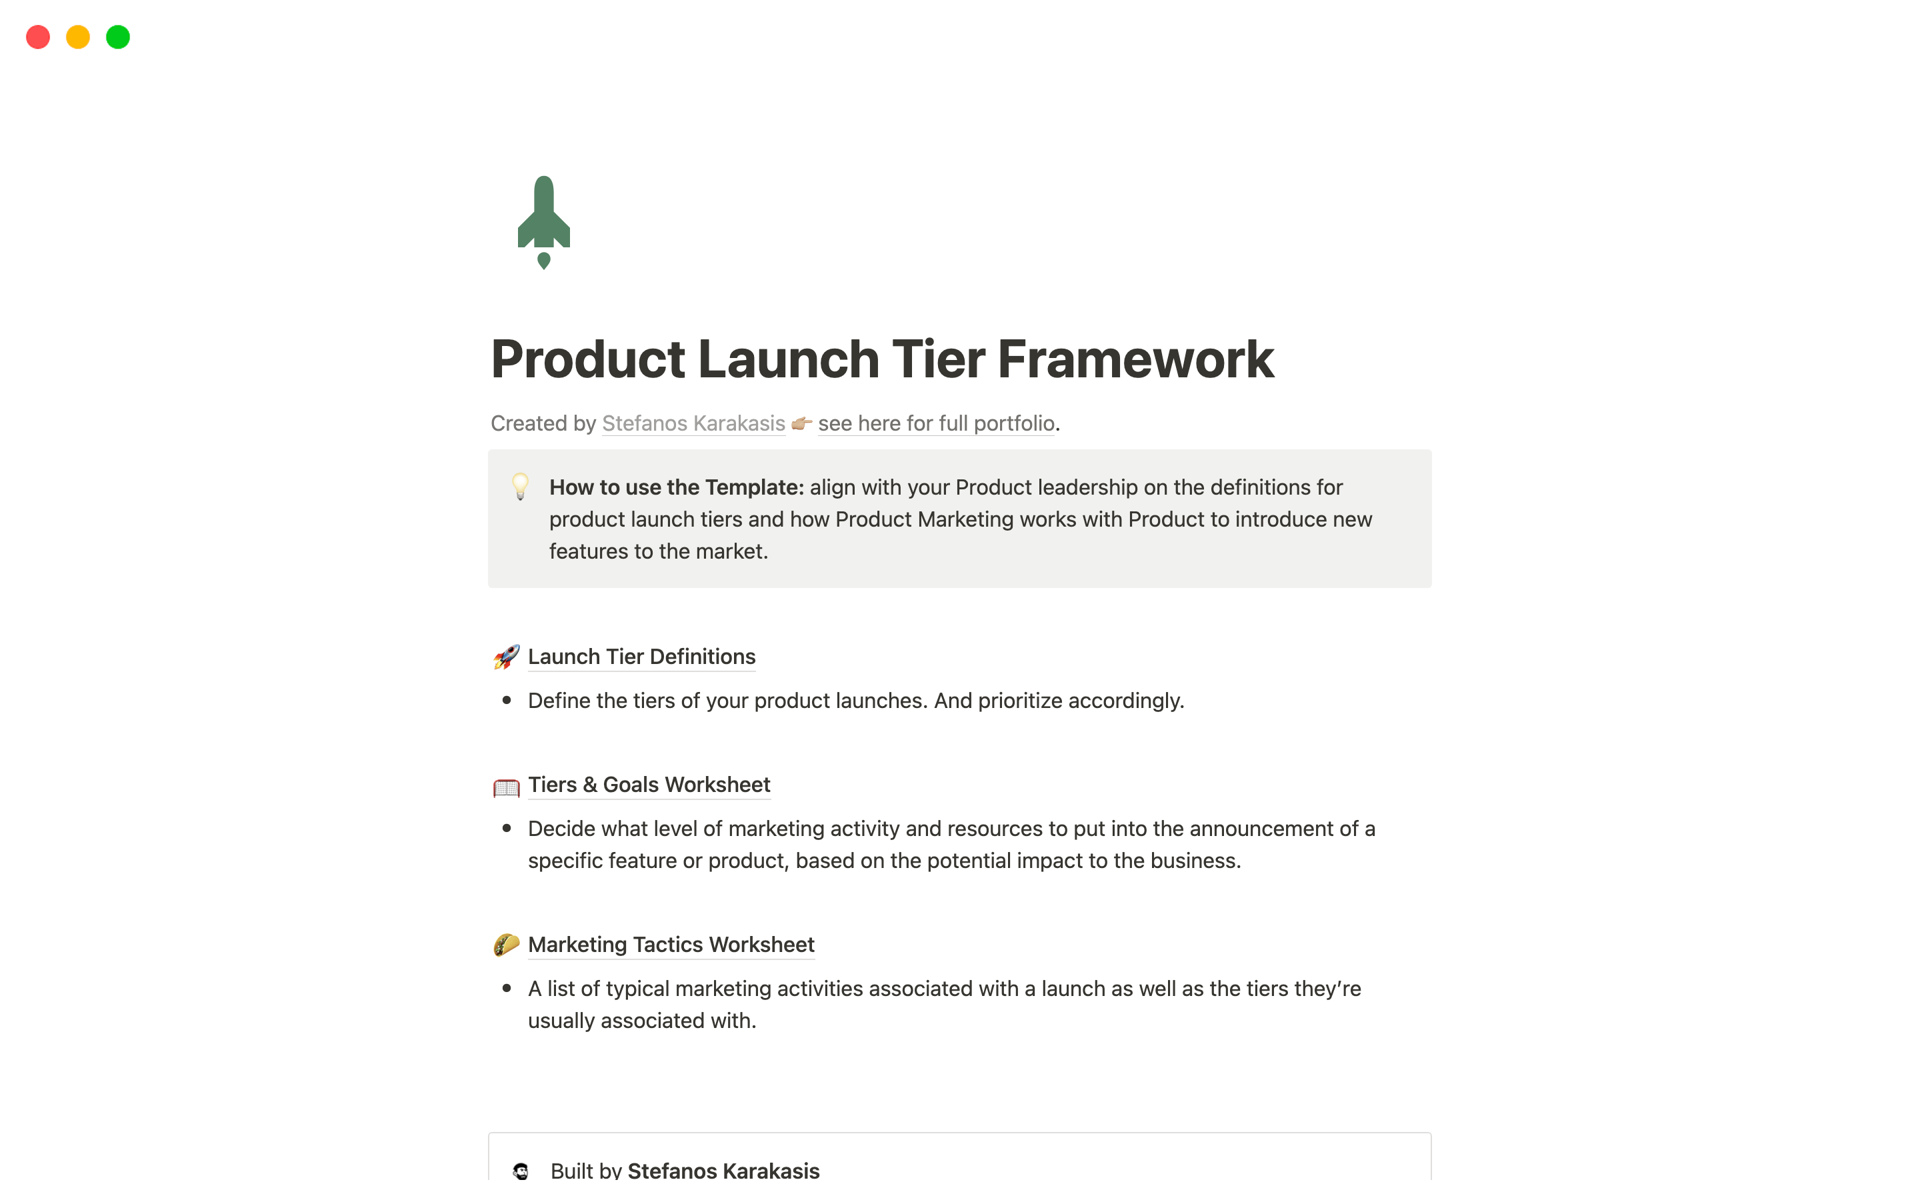 Use Product Launch Tiers to Prioritize Launches With the Most Business Impact